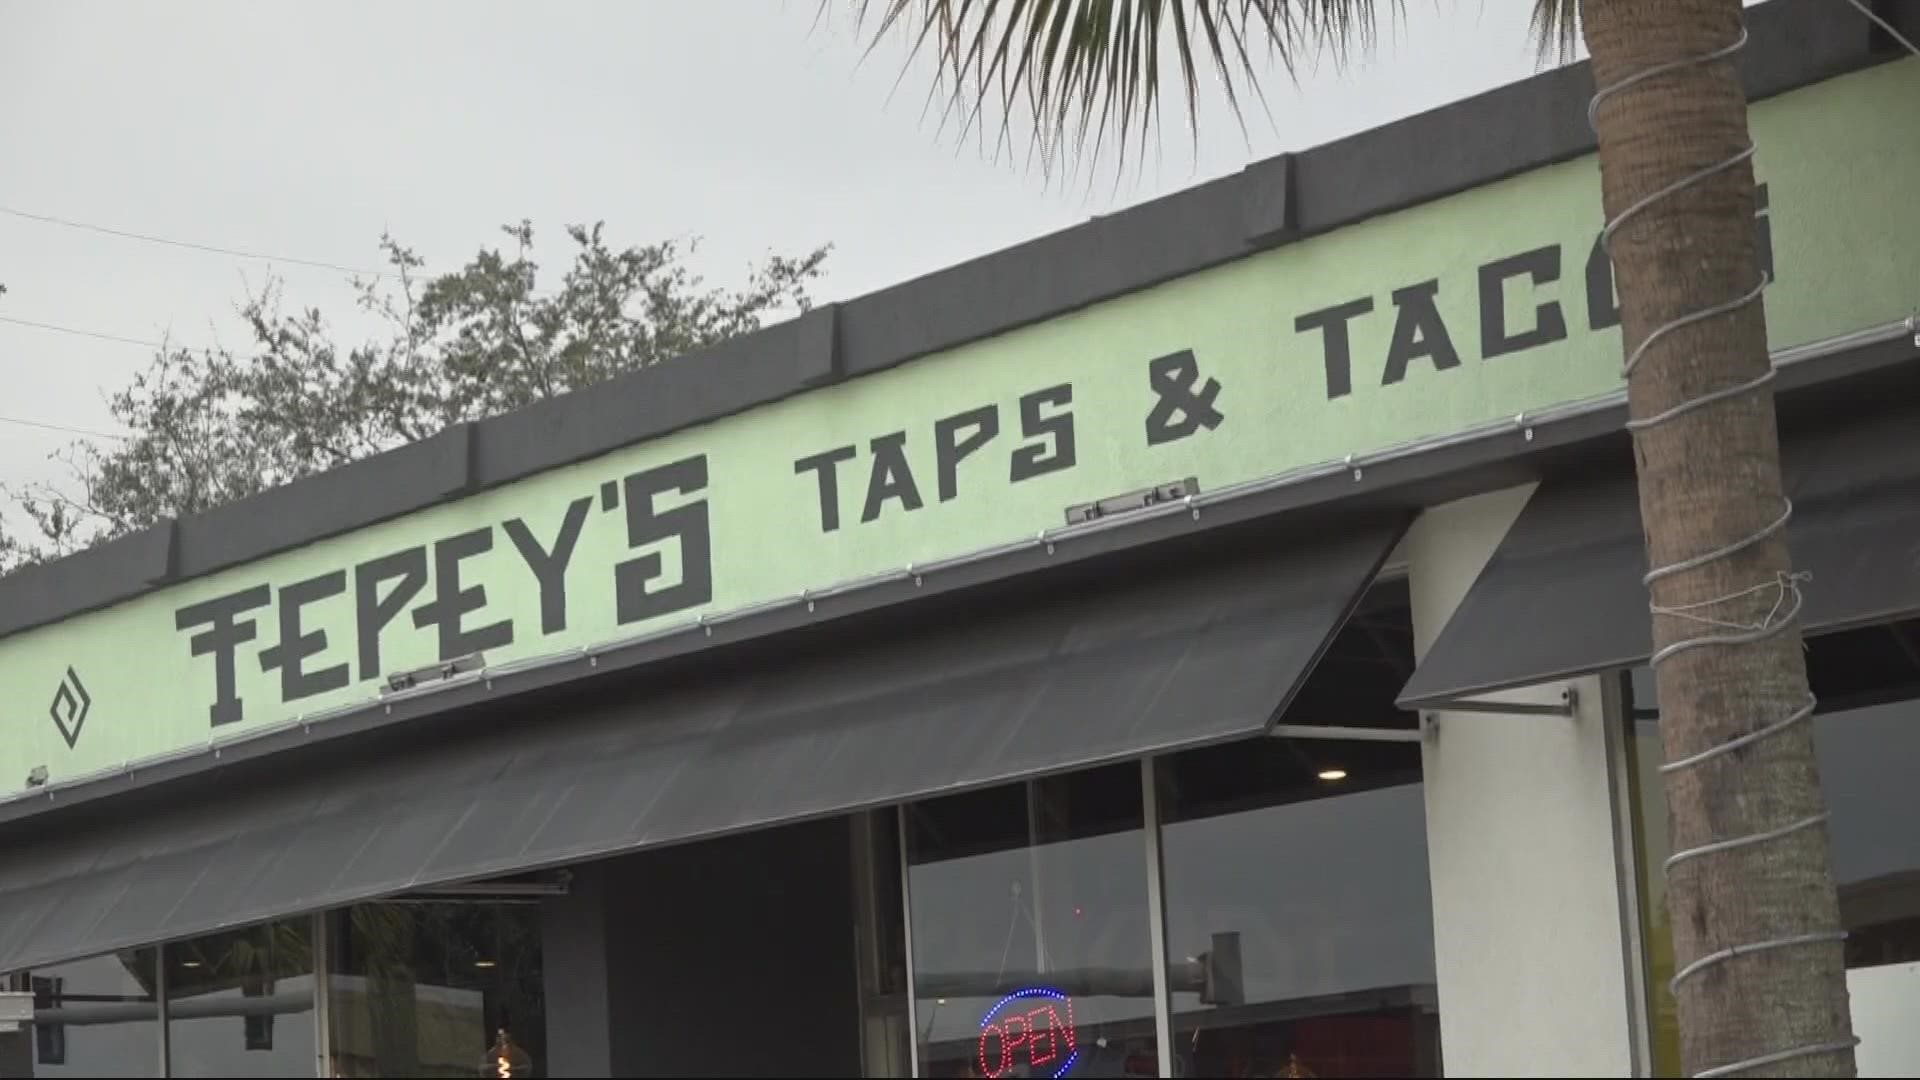 Tepeyolet Cerveceria in Jacksonville received threats from Proud Boys leading up to Sunday's "Sleigh the Holidays Drag Brunch"